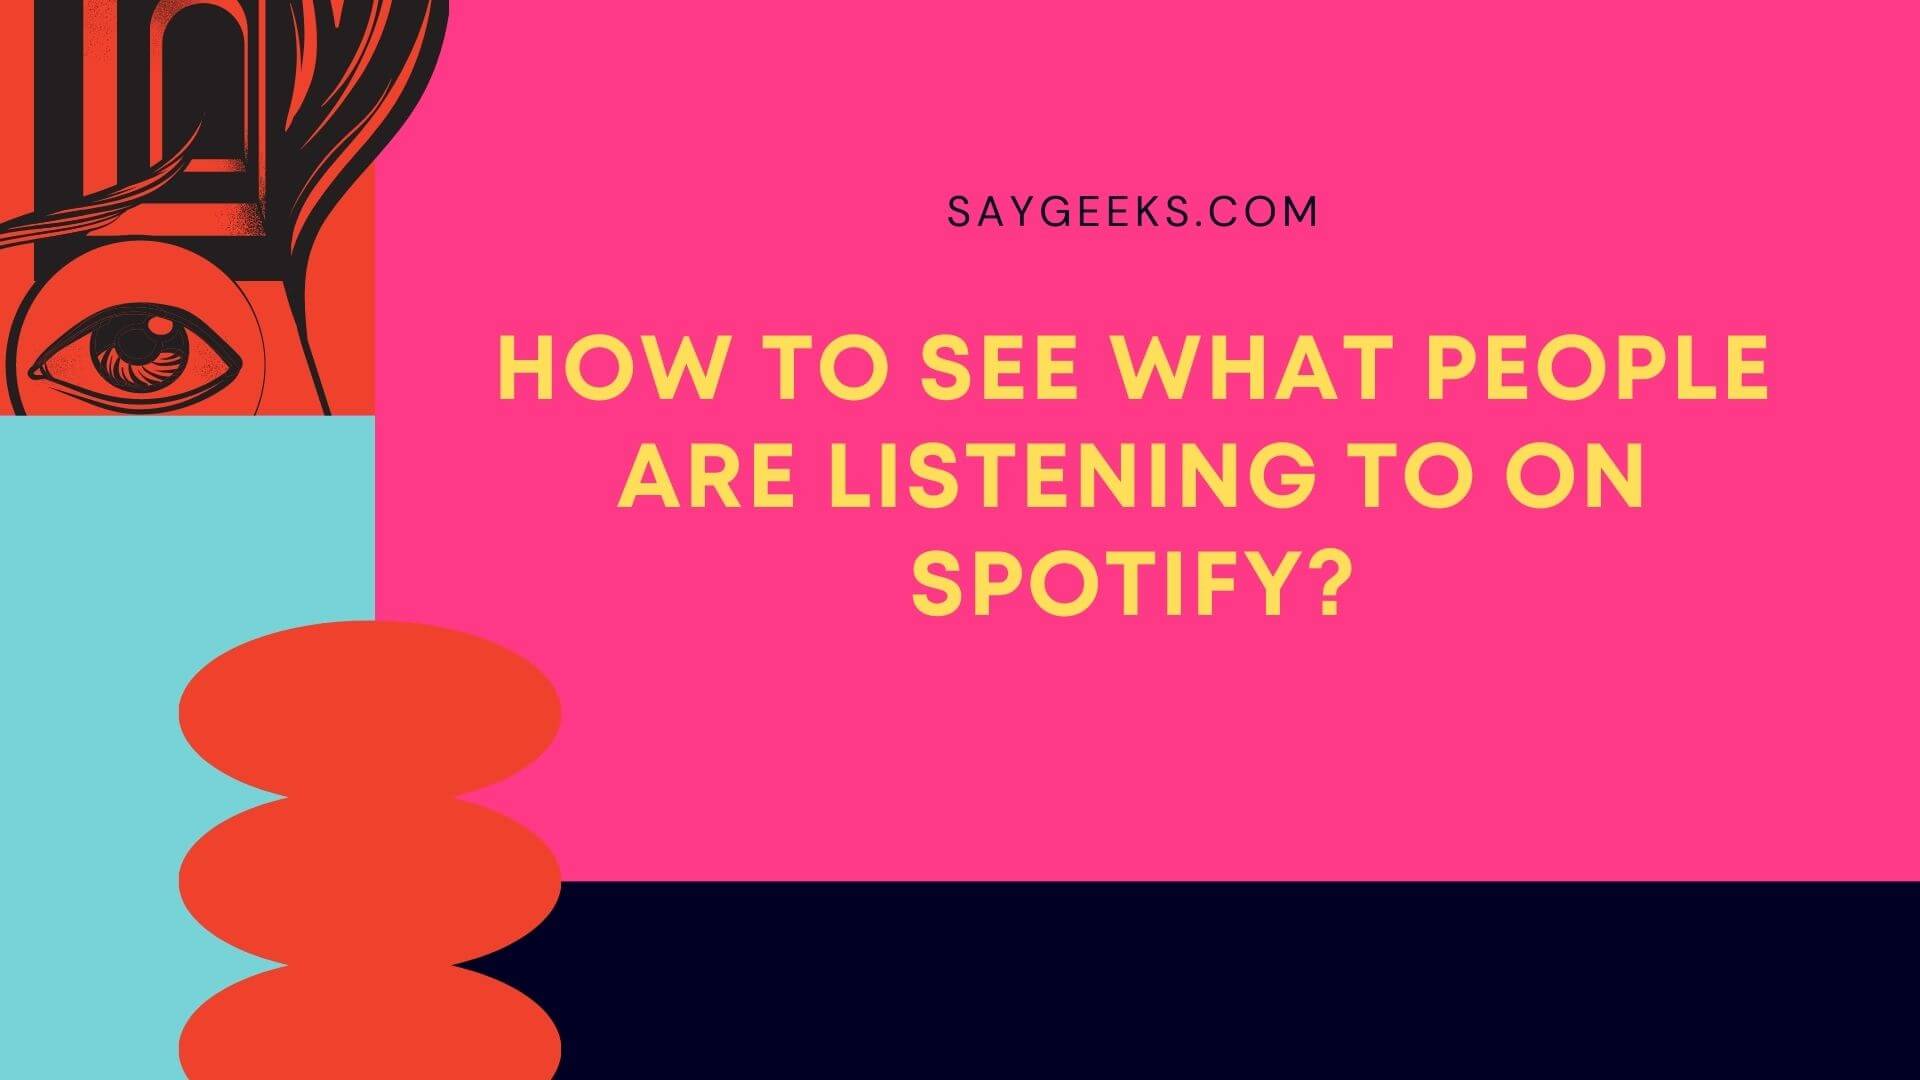 How to see what people are listening to on Spotify